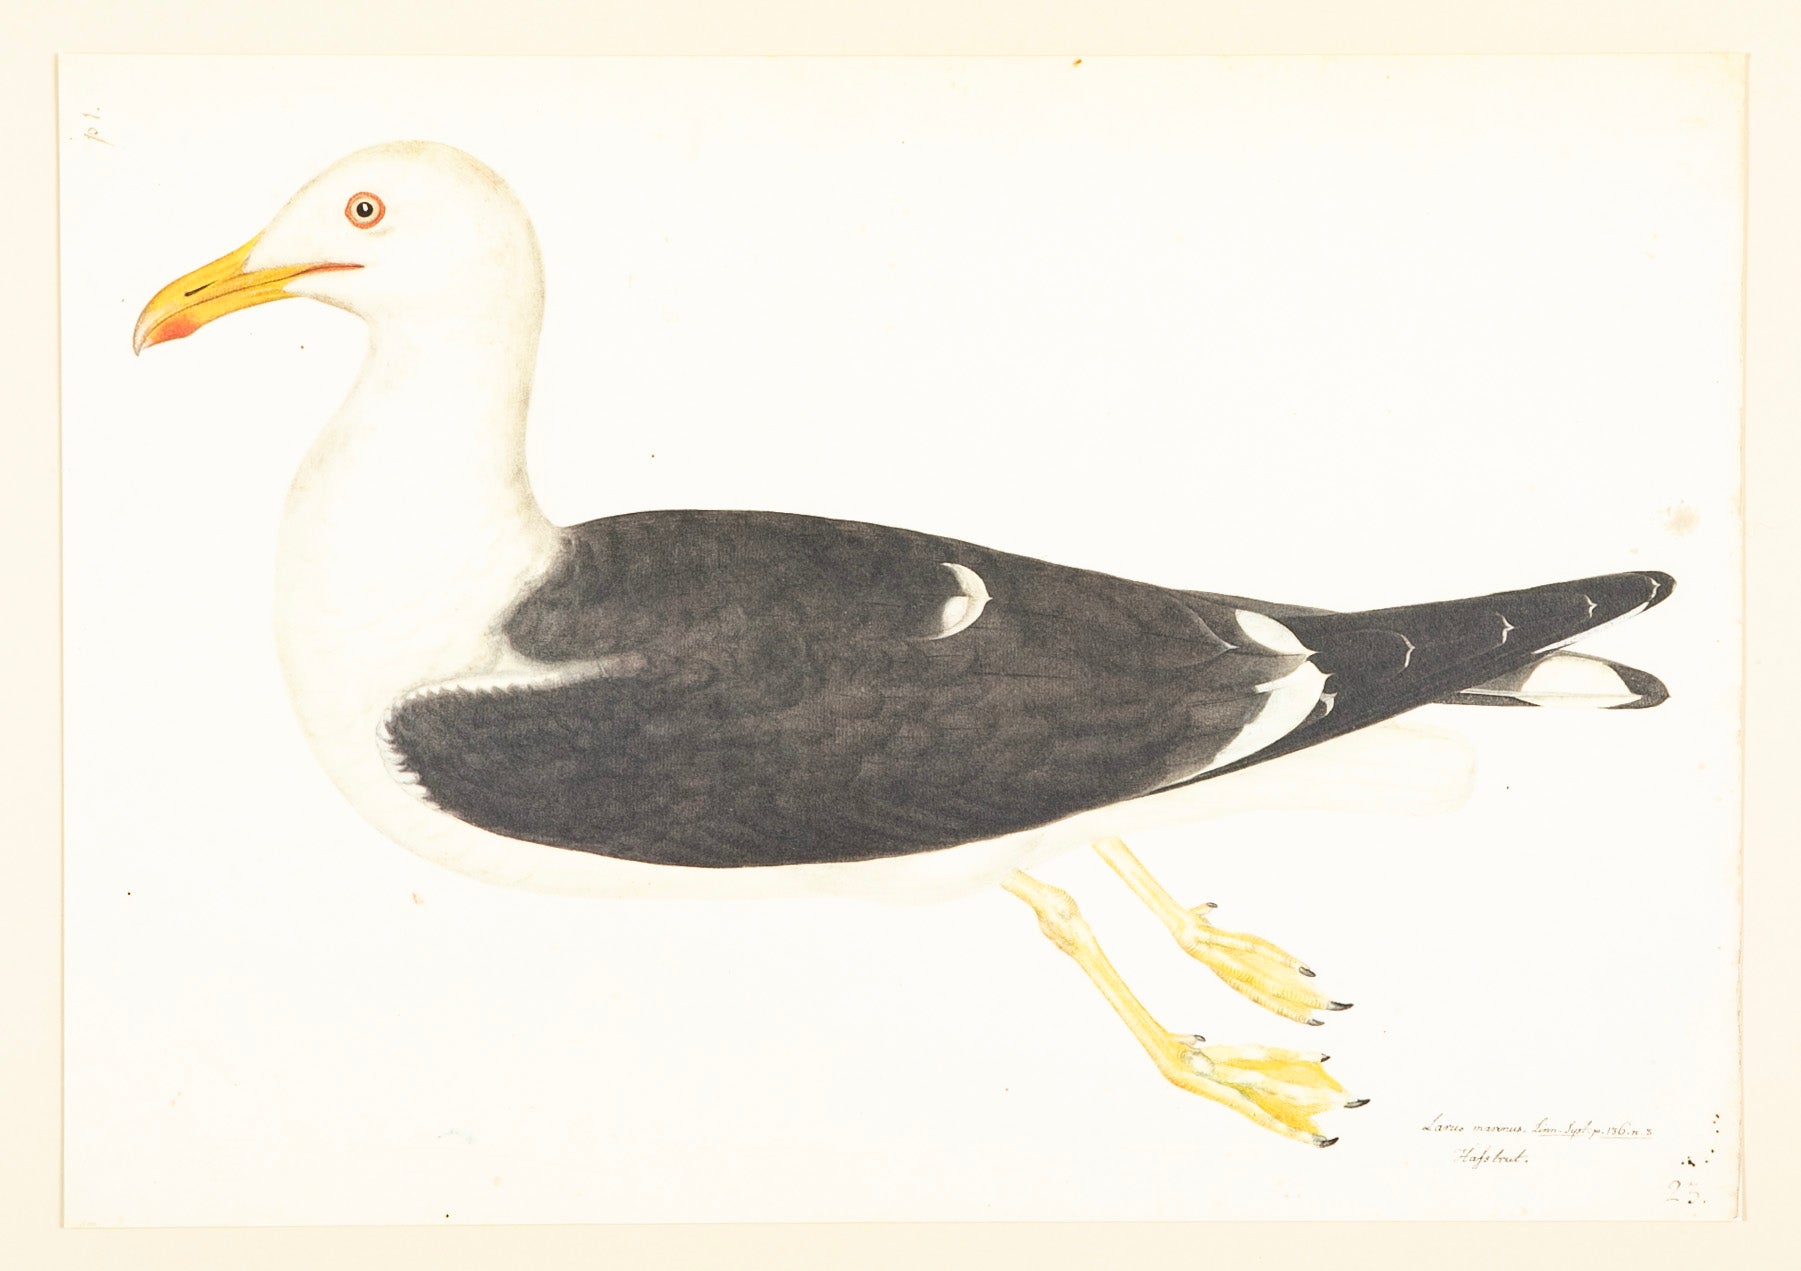 Offset Lithograph of "Lesser Black Backed Gull, PL 23" from the "The  Great Bird Book" by Olof Rudbeck The Younger